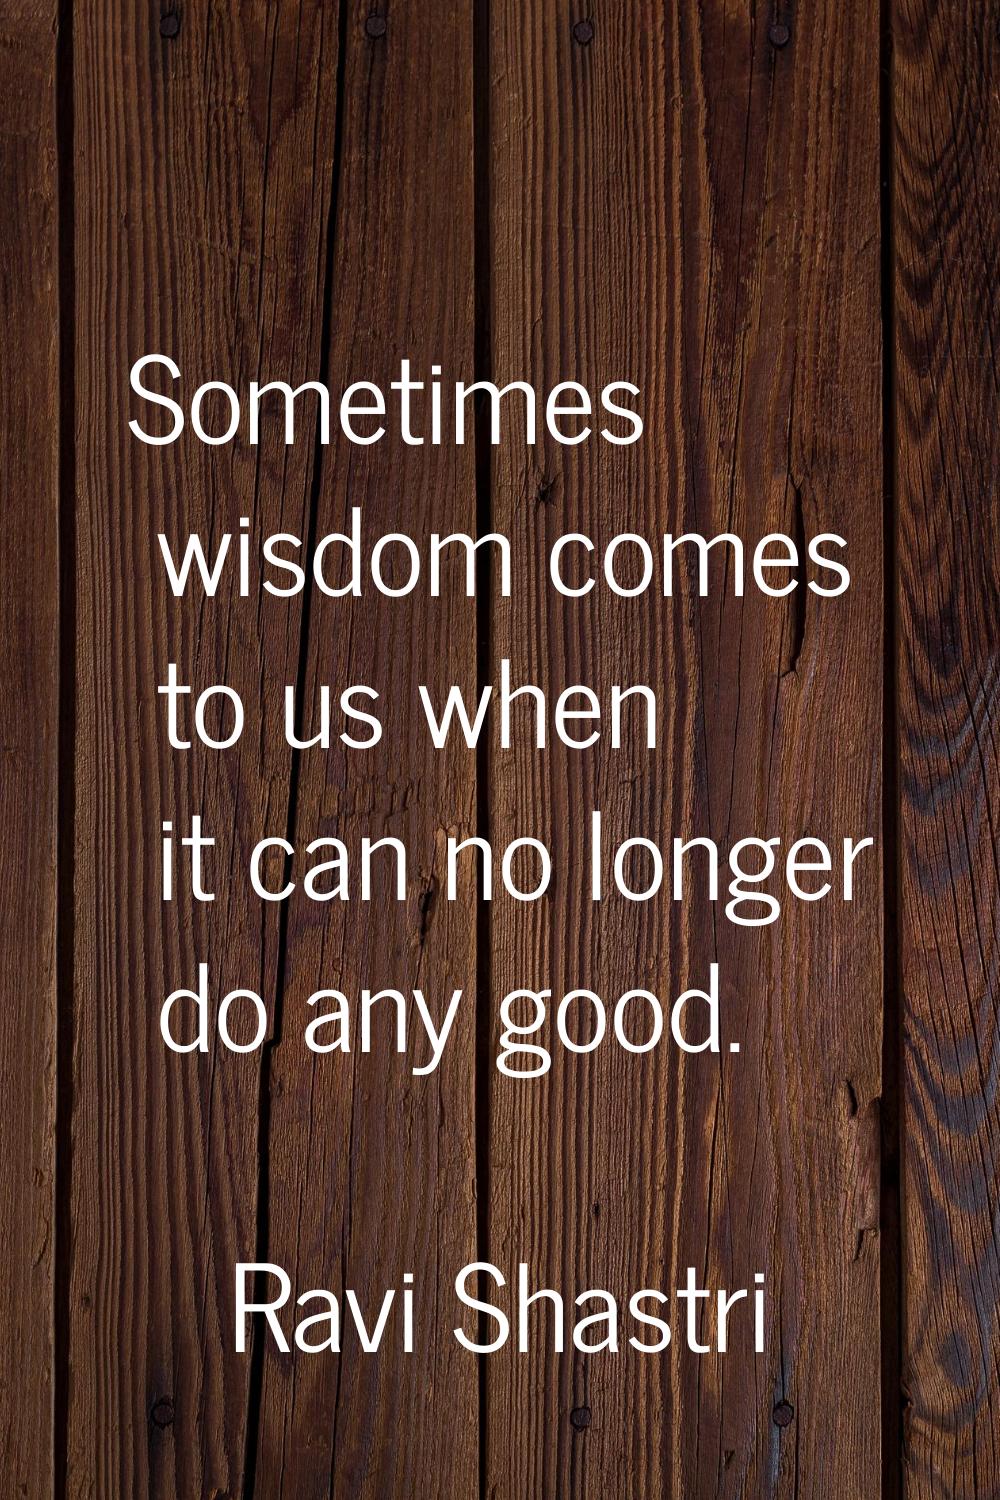 Sometimes wisdom comes to us when it can no longer do any good.